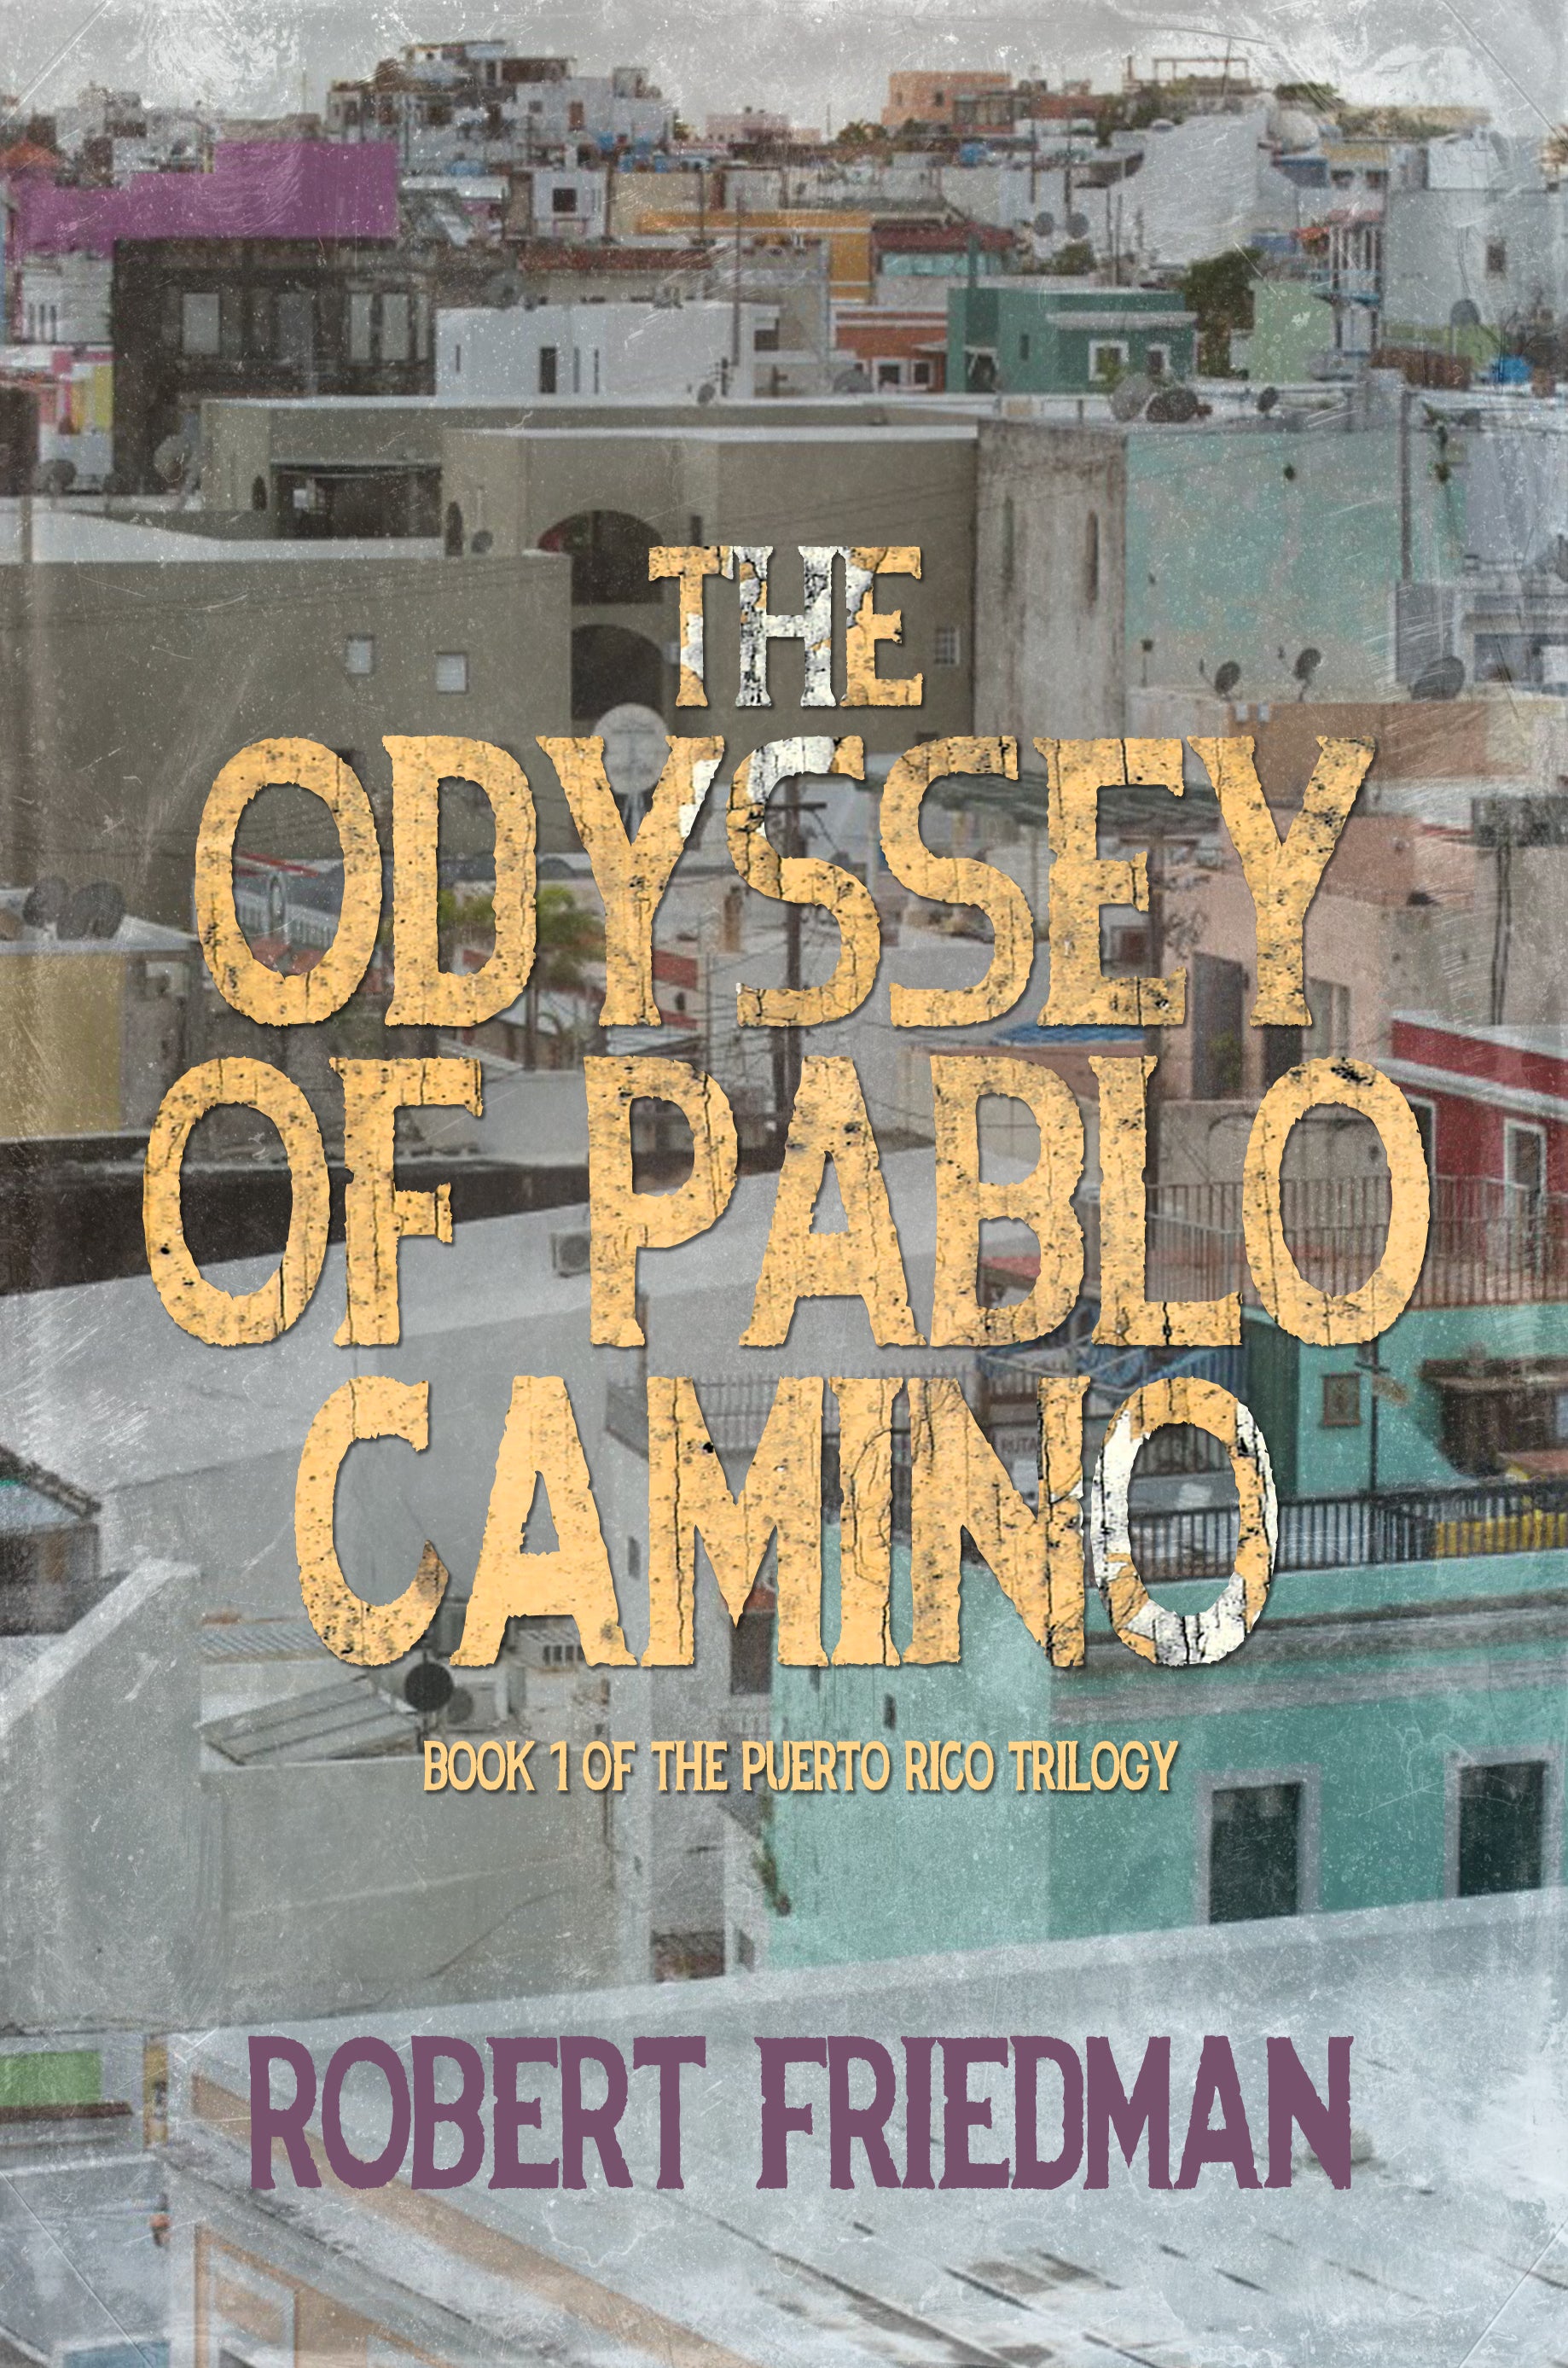 Robert Friedman’s “The Odyssey of Pablo Camino” is the Brown Posey Press bestseller for May